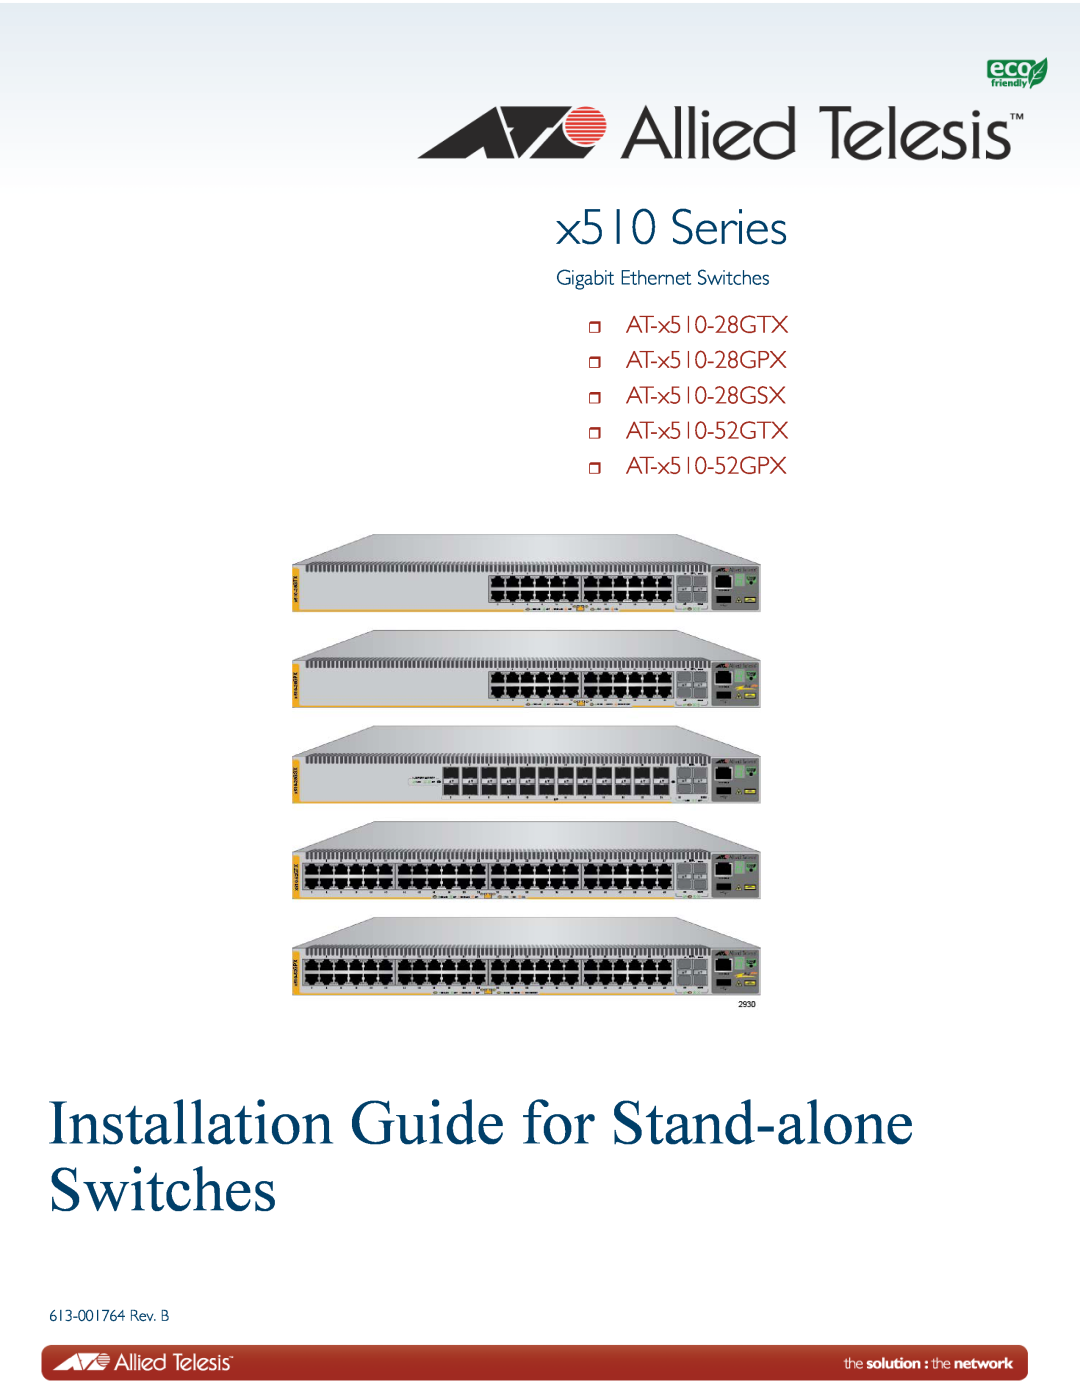 Allied Telesis AT-X510-28GTX manual Installation Guide for Stand-alone Switches, x510 Series, Gigabit Ethernet Switches 